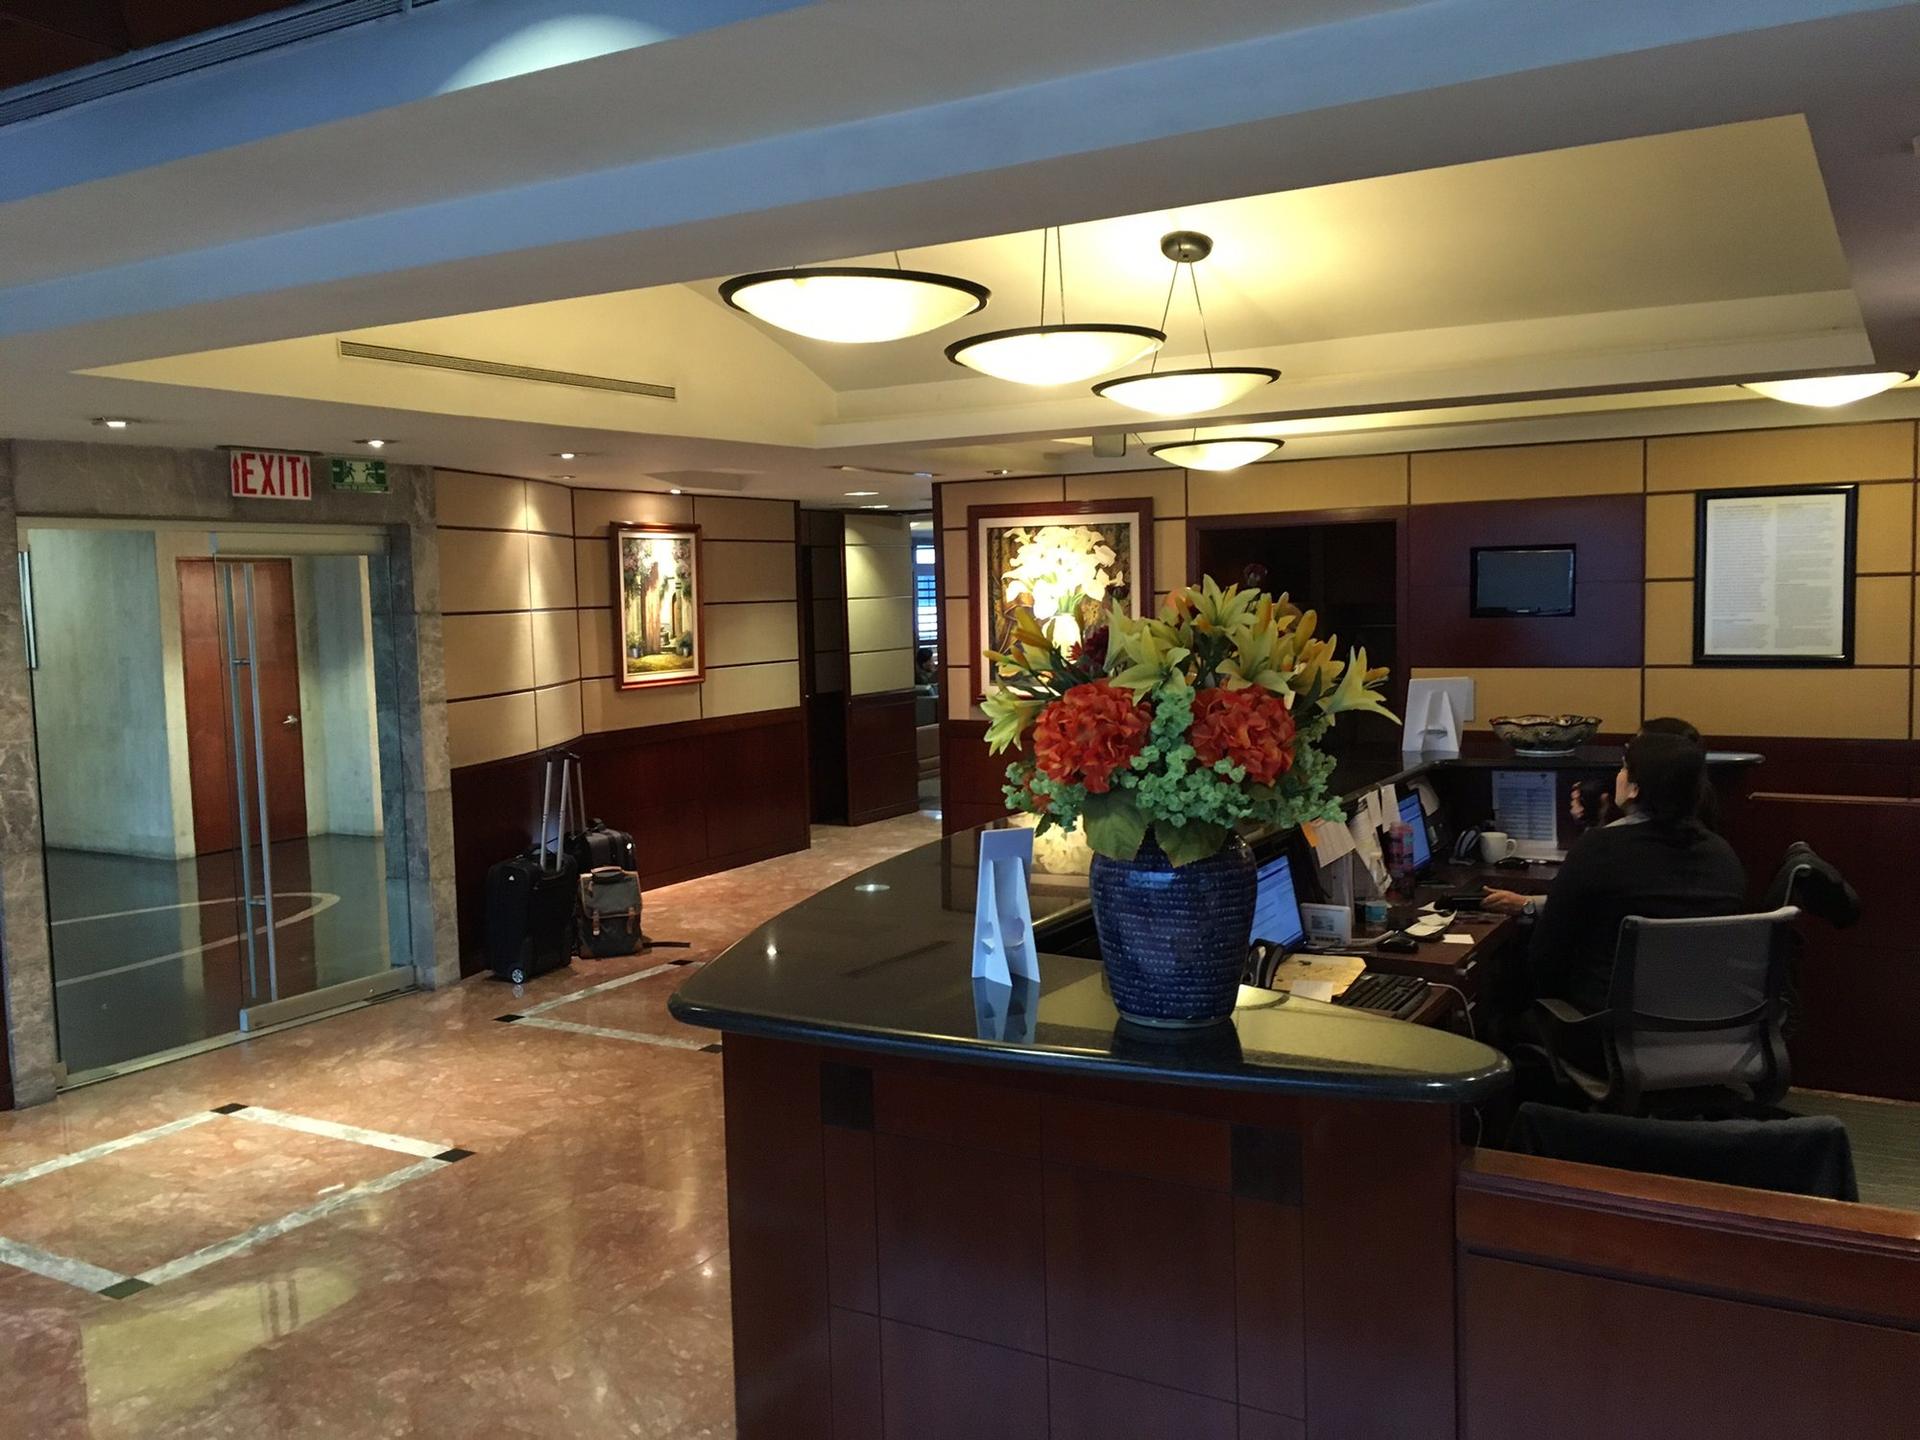 American Airlines Admirals Club image 18 of 32